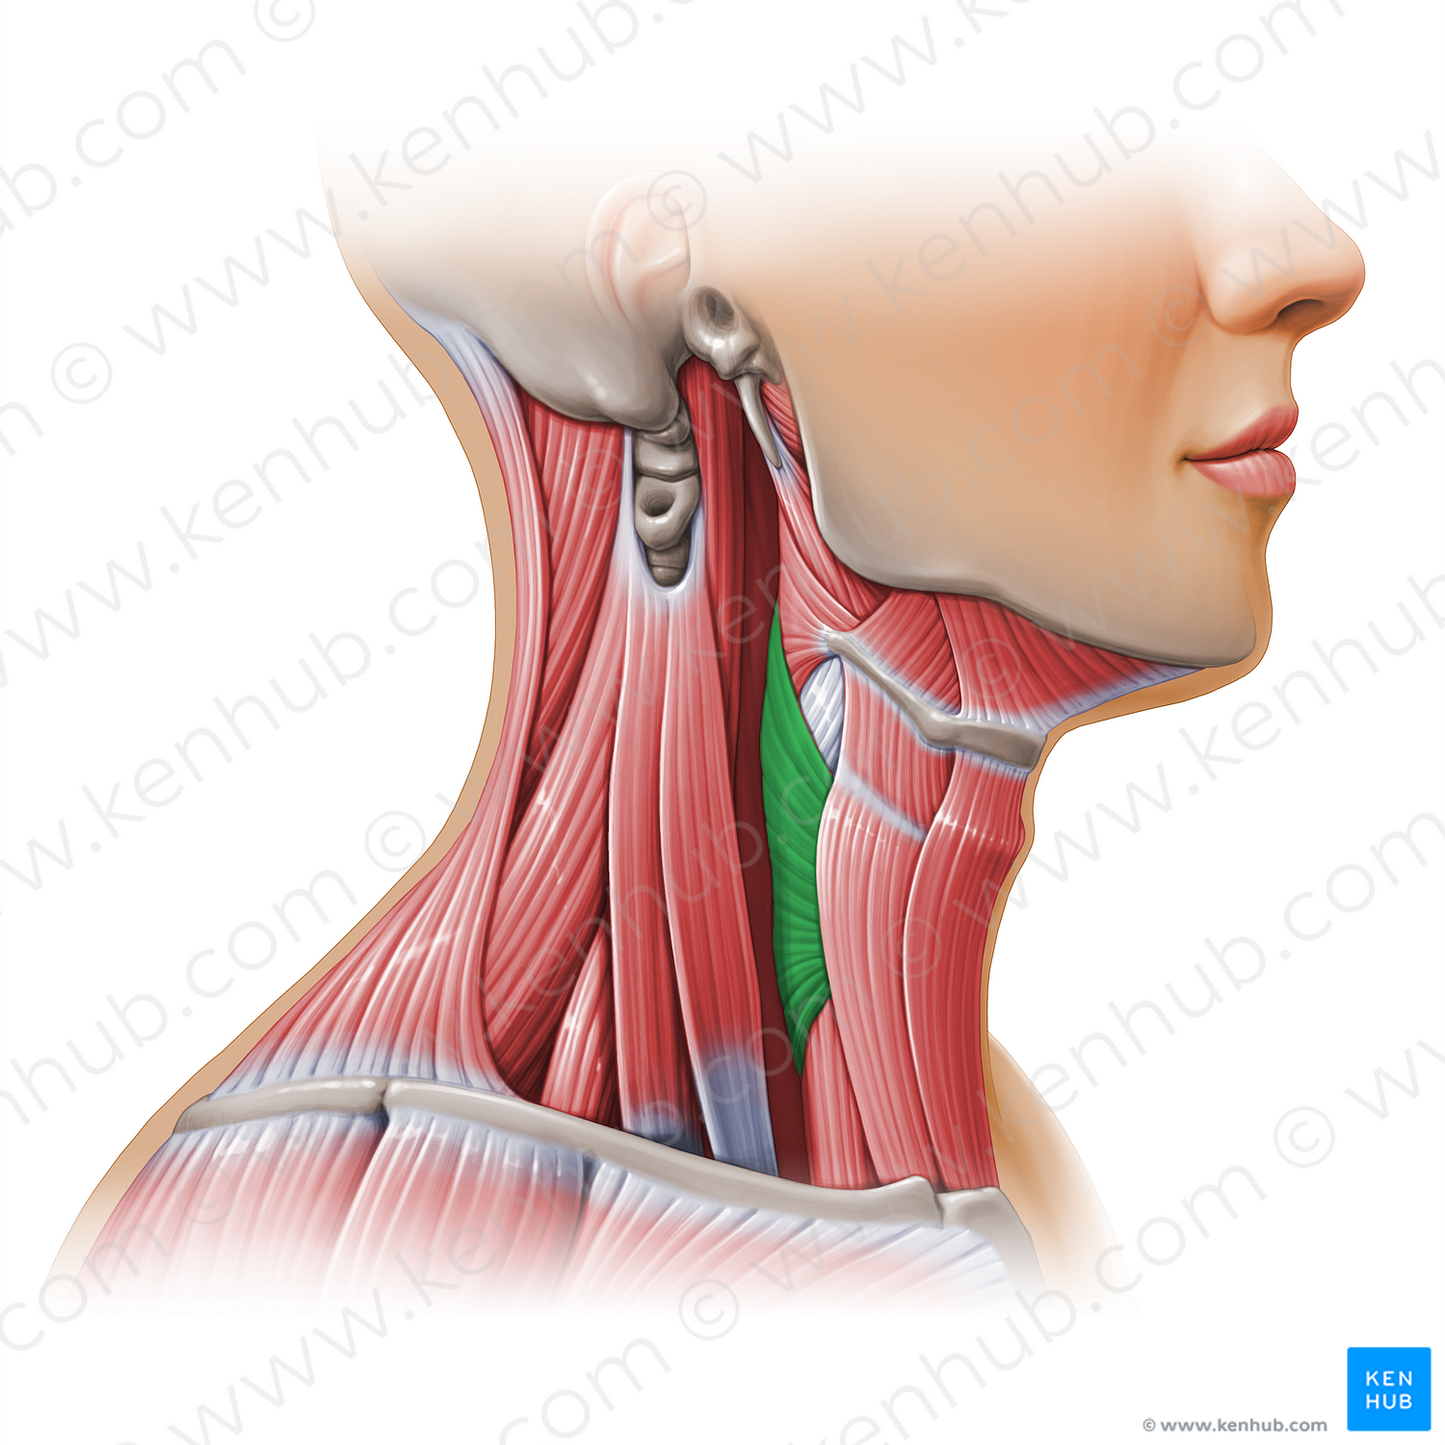 Inferior pharyngeal constrictor muscle (#11118)